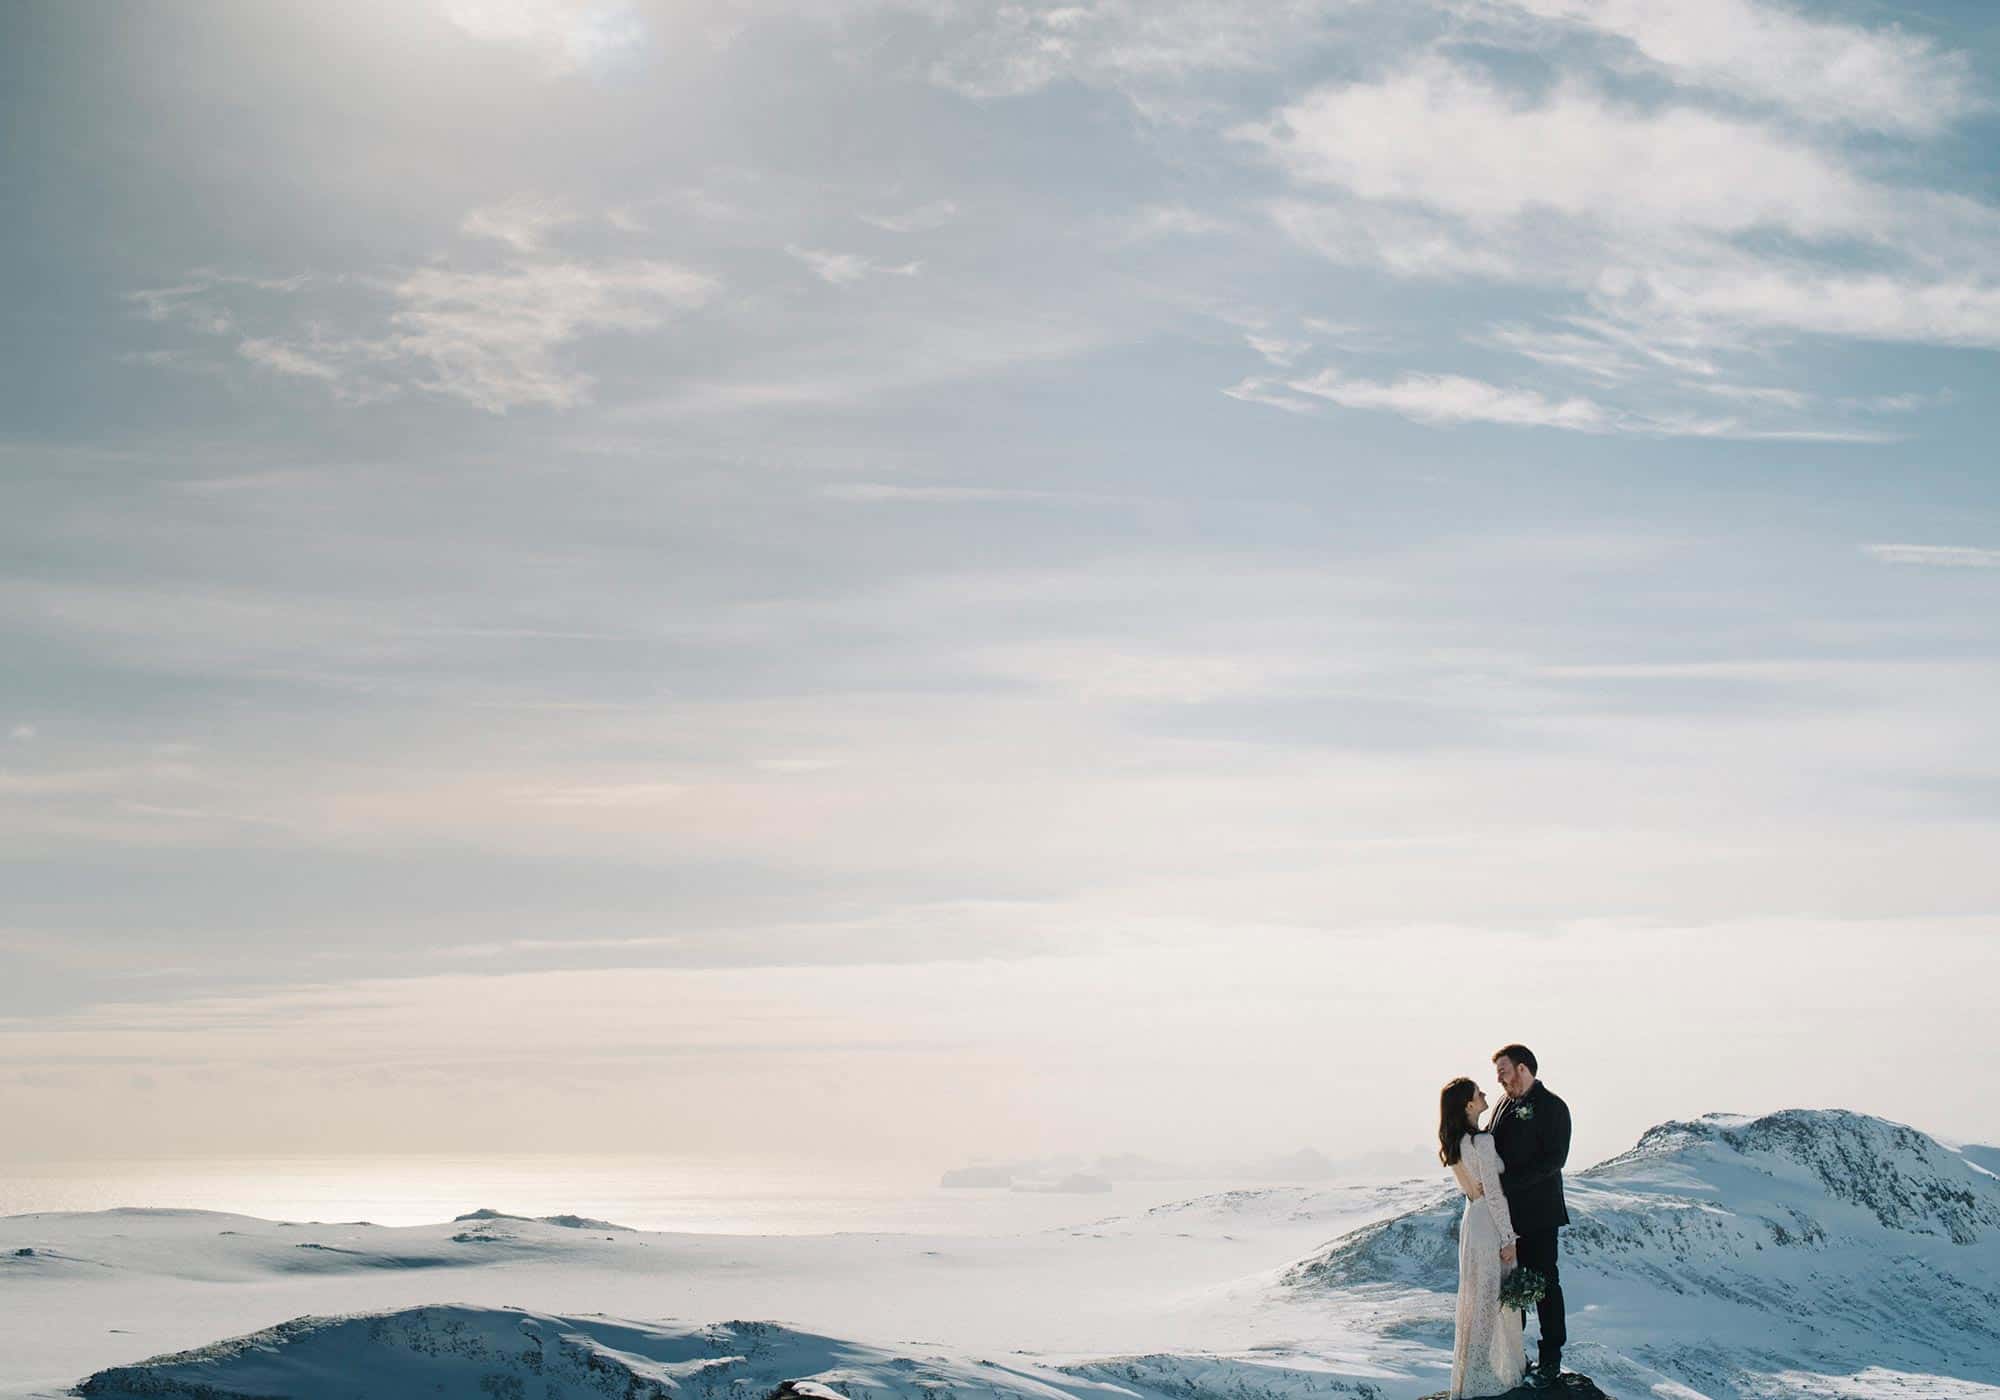 Bride wearing white dress and groom in dark suit embrace in the midst of snowy mountains in south Iceland.